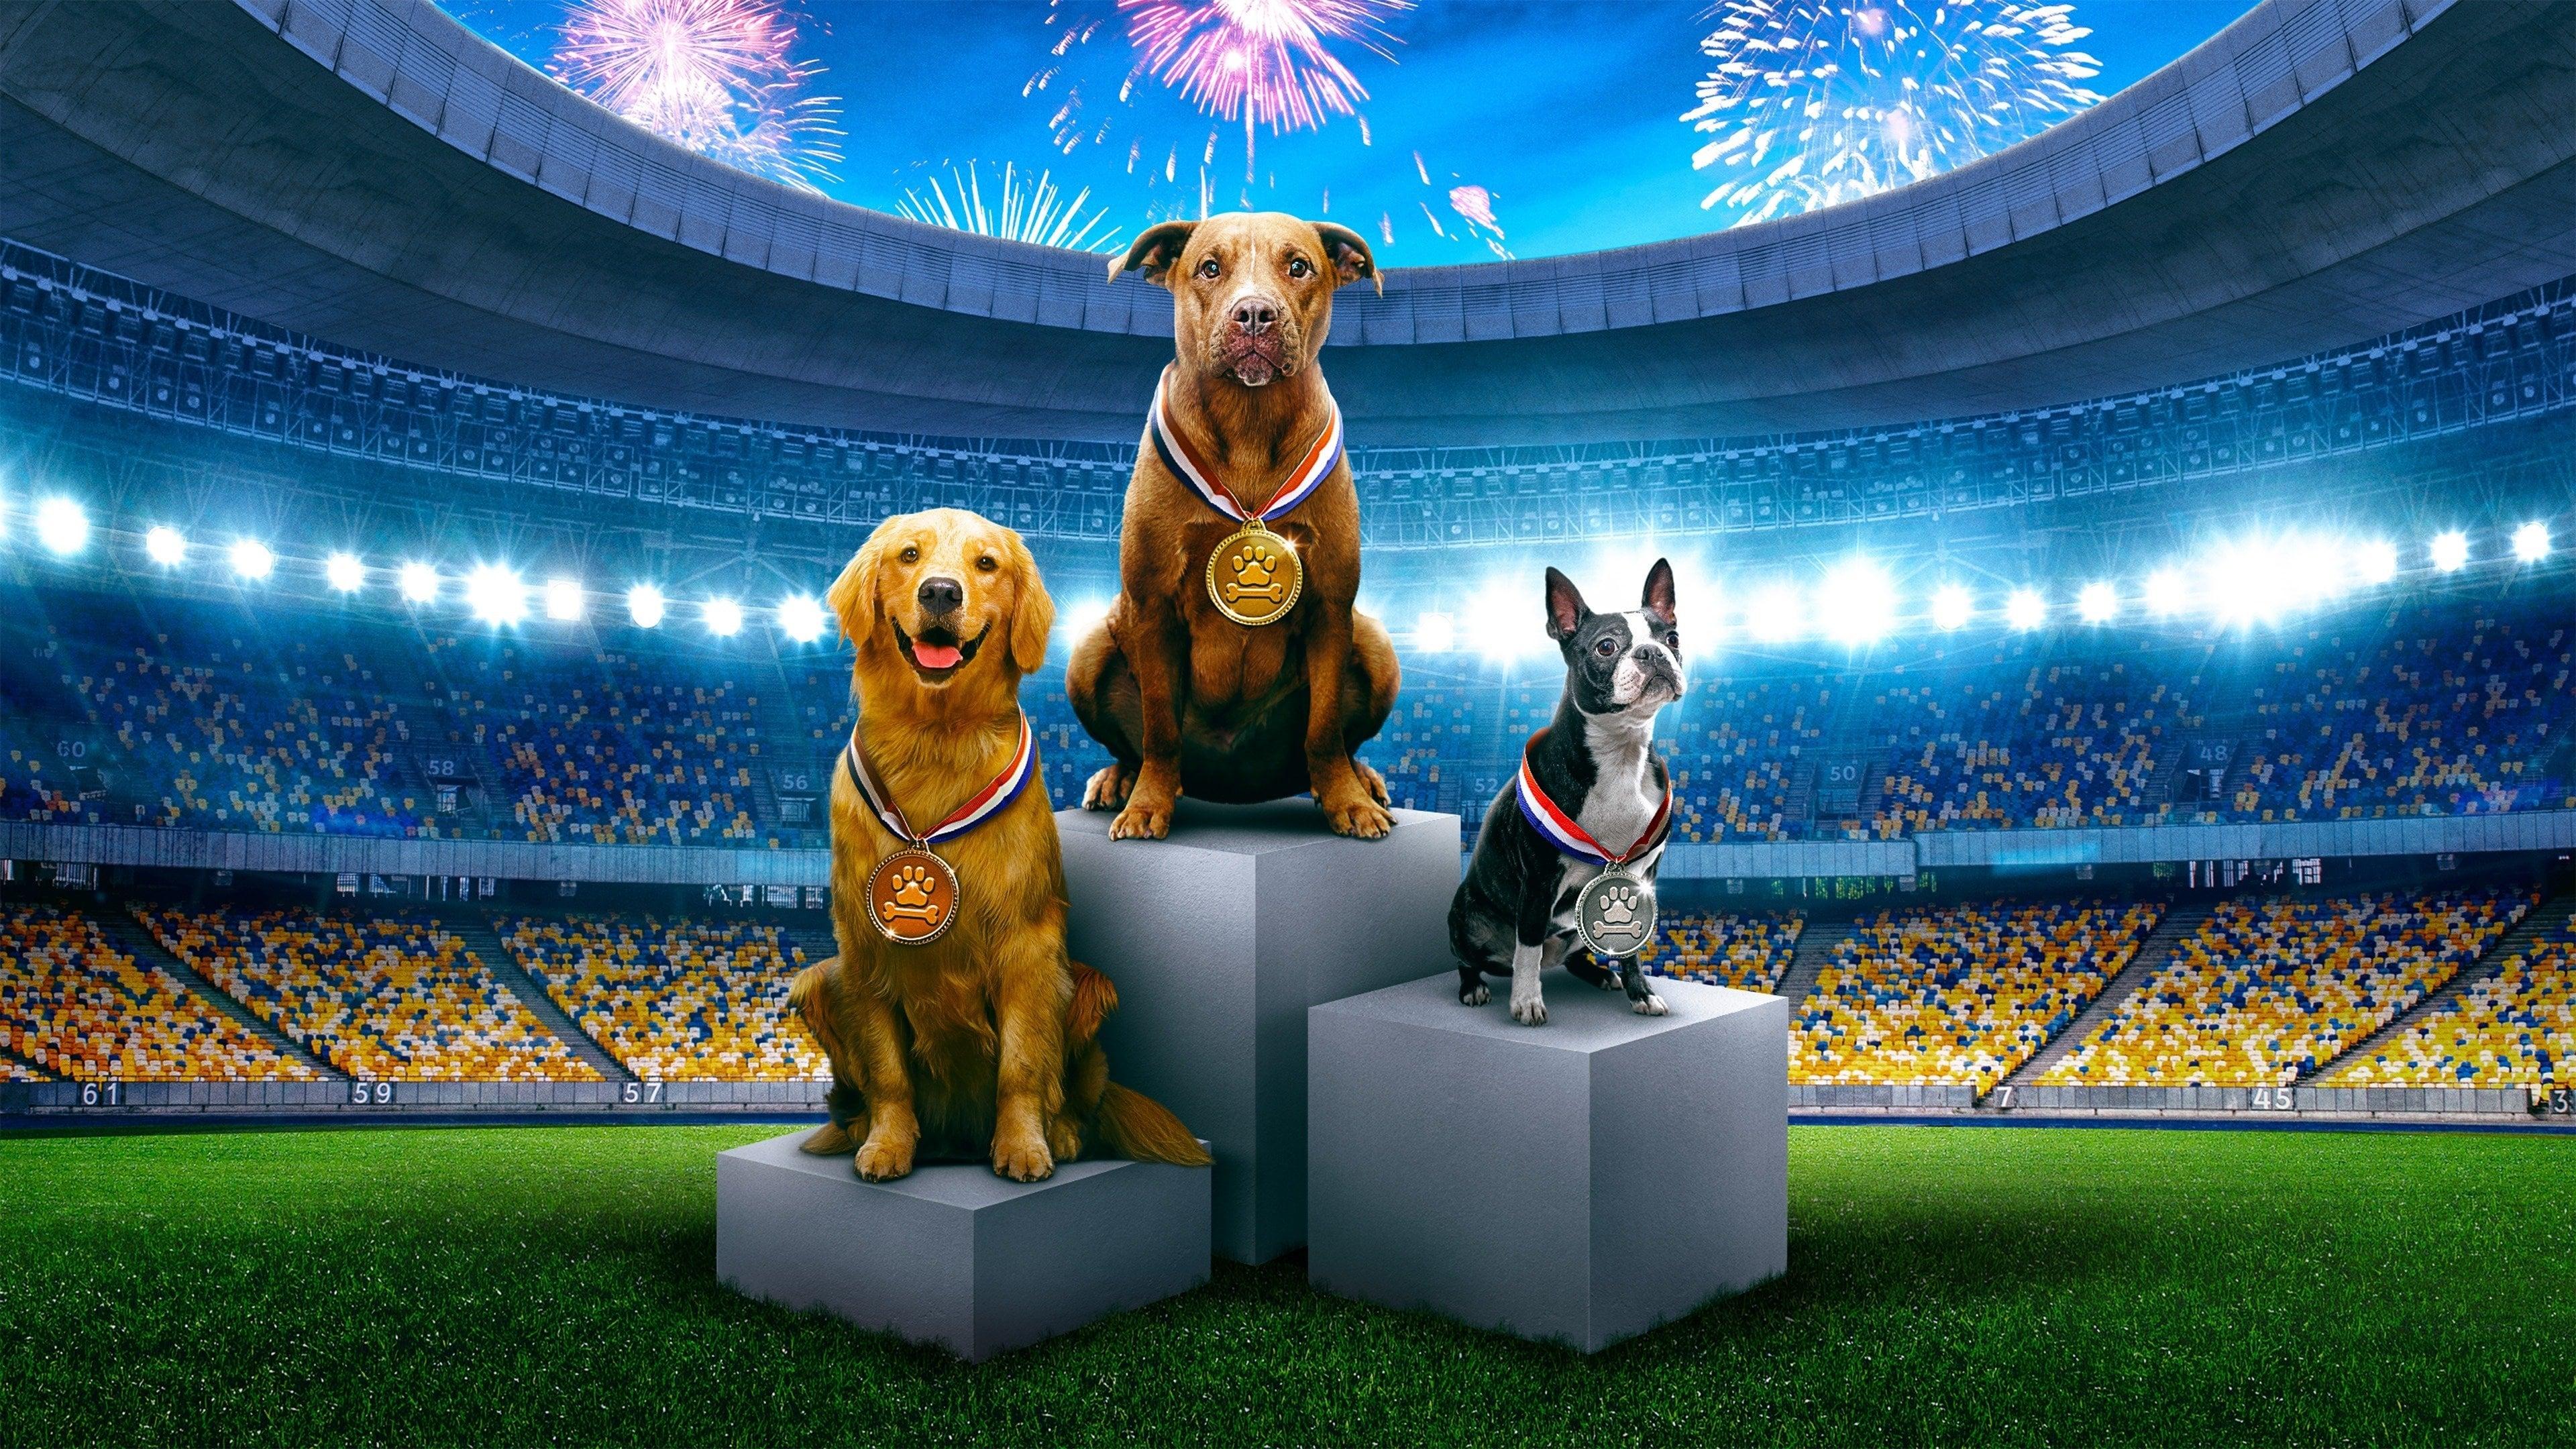 Puppy Bowl Presents: The Summer Games backdrop